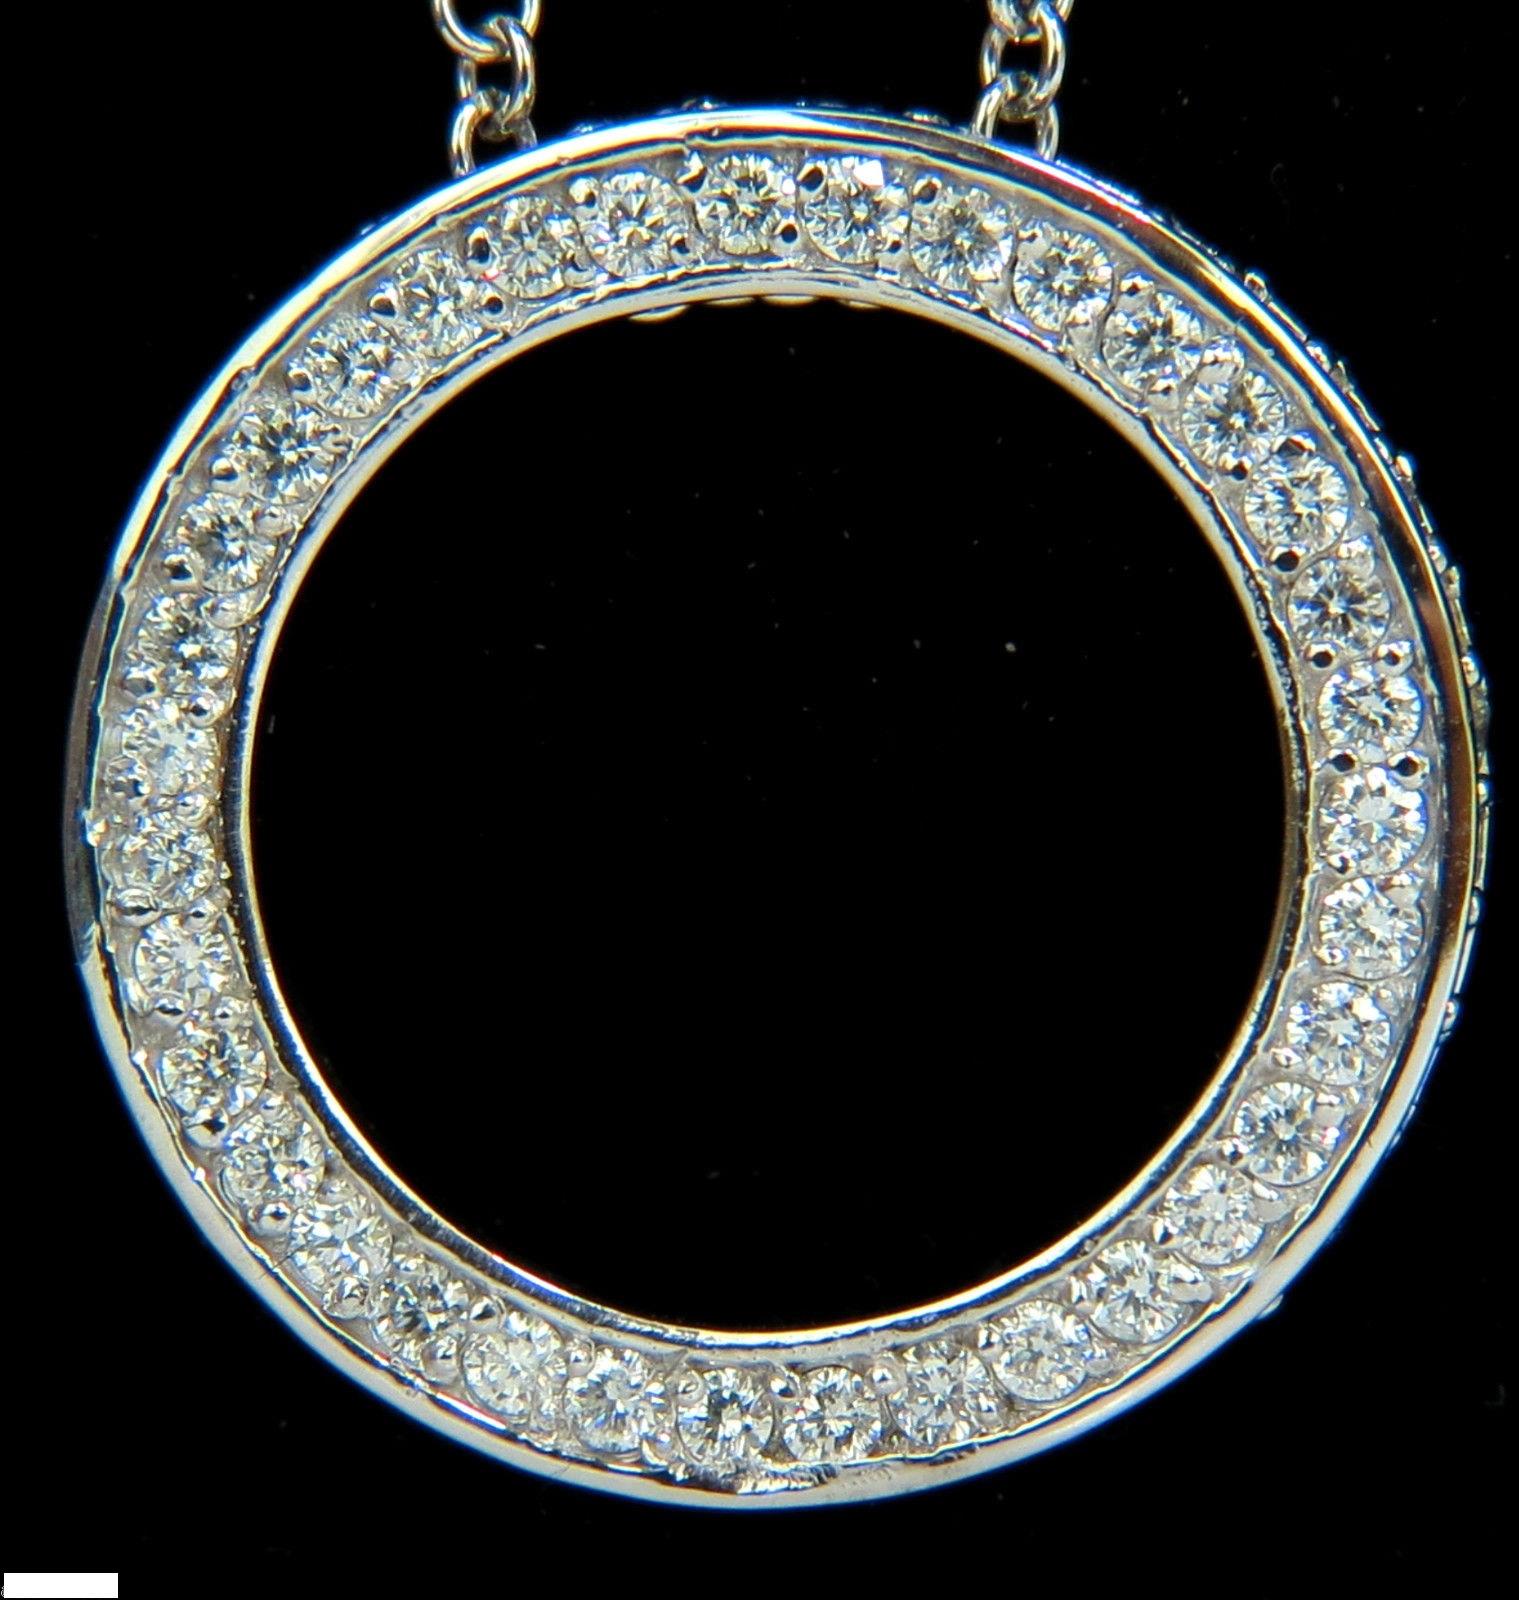 2.30ct. Diamonds 

Inside / Out circle

Full cuts, G-color, Vs-2 clarity

Diamonds are mounted within top of frame and profile.

.96 inch / 24.8mm diameter

3.8mm depth.

18 inch necklace included.

14kt. white gold

9 Grams

$6500 Appraisal will